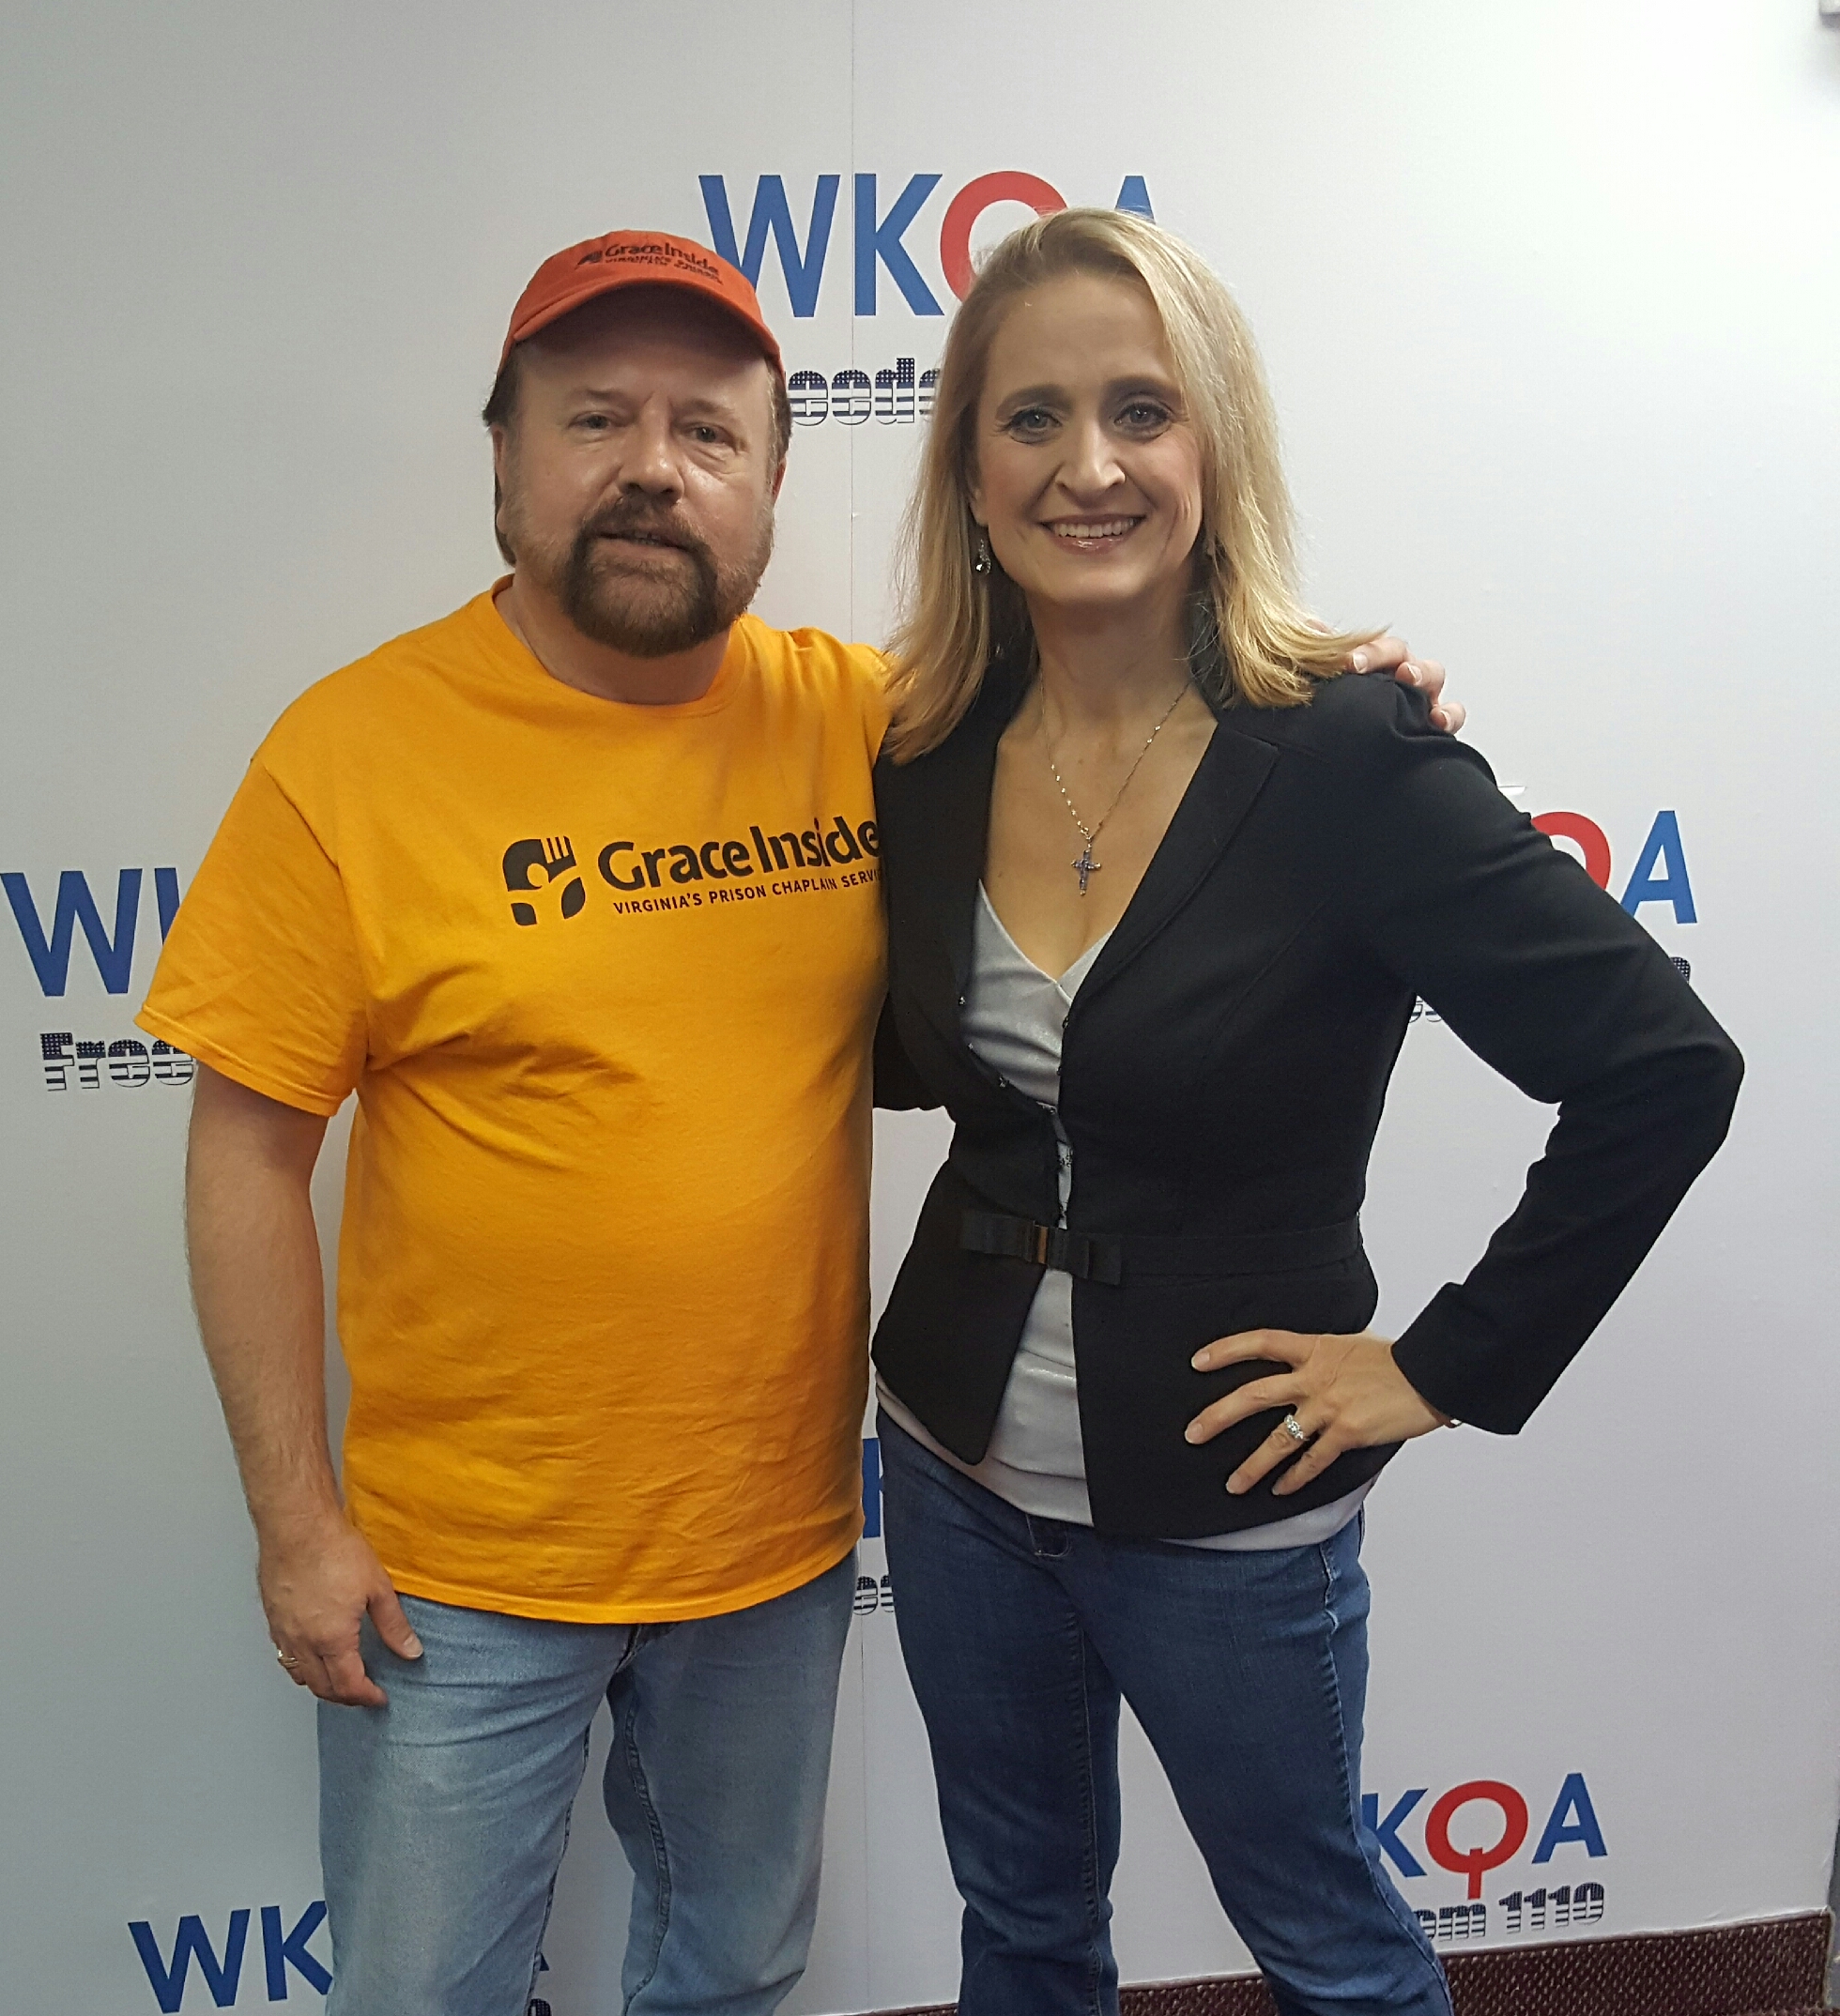 Guest Rev. J. Randy Myers and host Dr. Christine M. Bacon sharing a smile at the WKQA studios in Norfolk, Virginia after an energy-filled broadcast. 